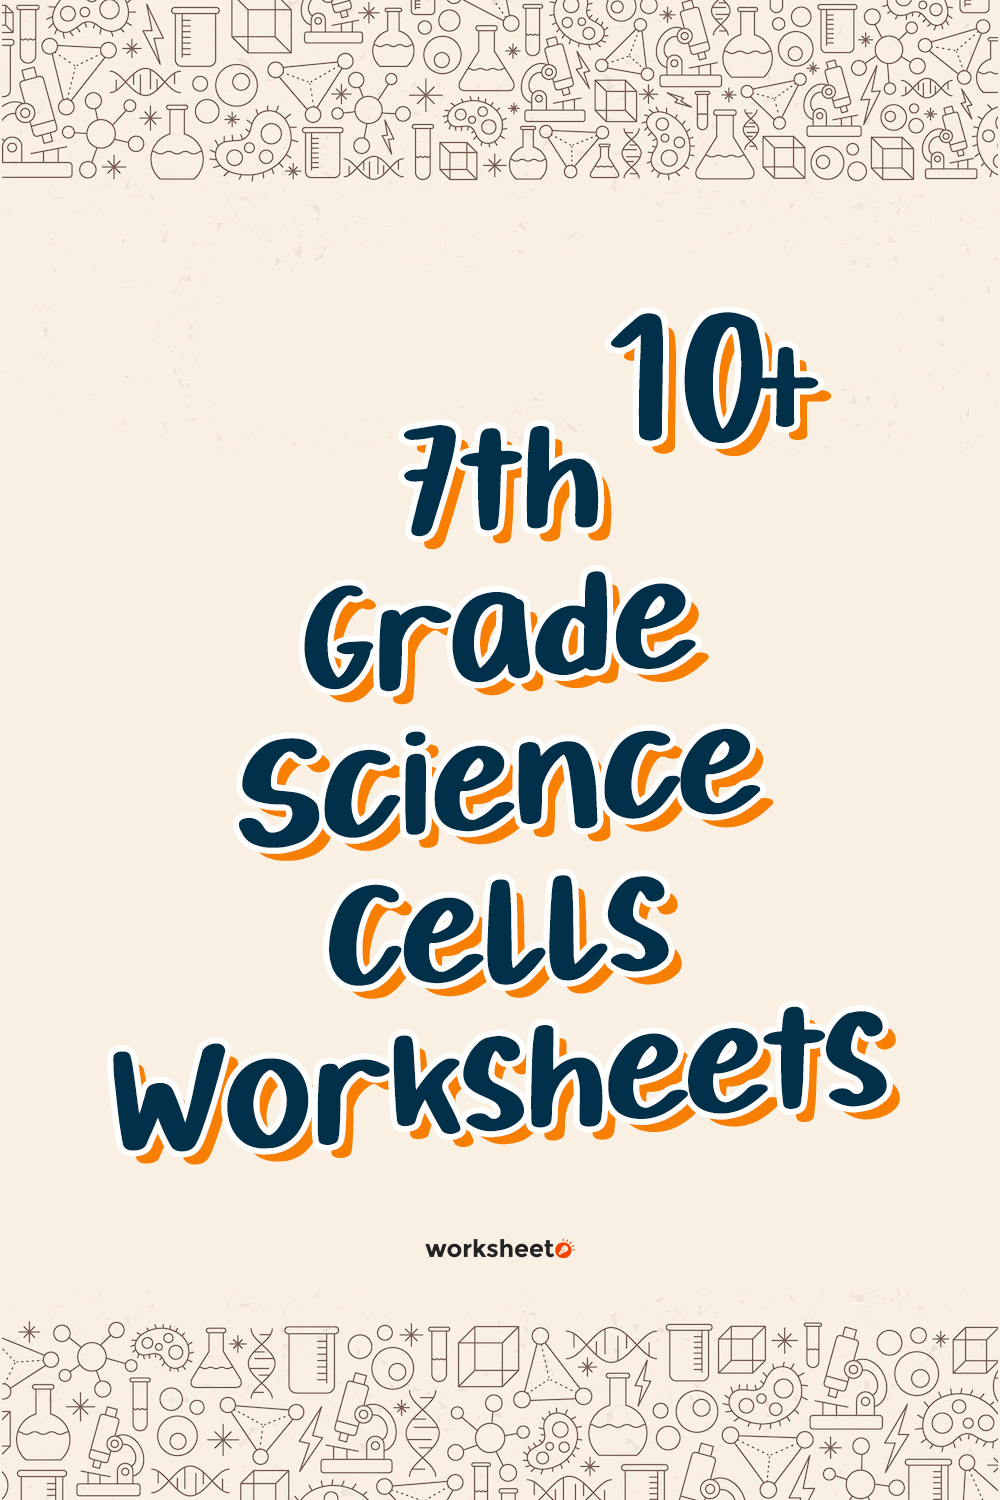 7th Grade Science Cells Worksheets